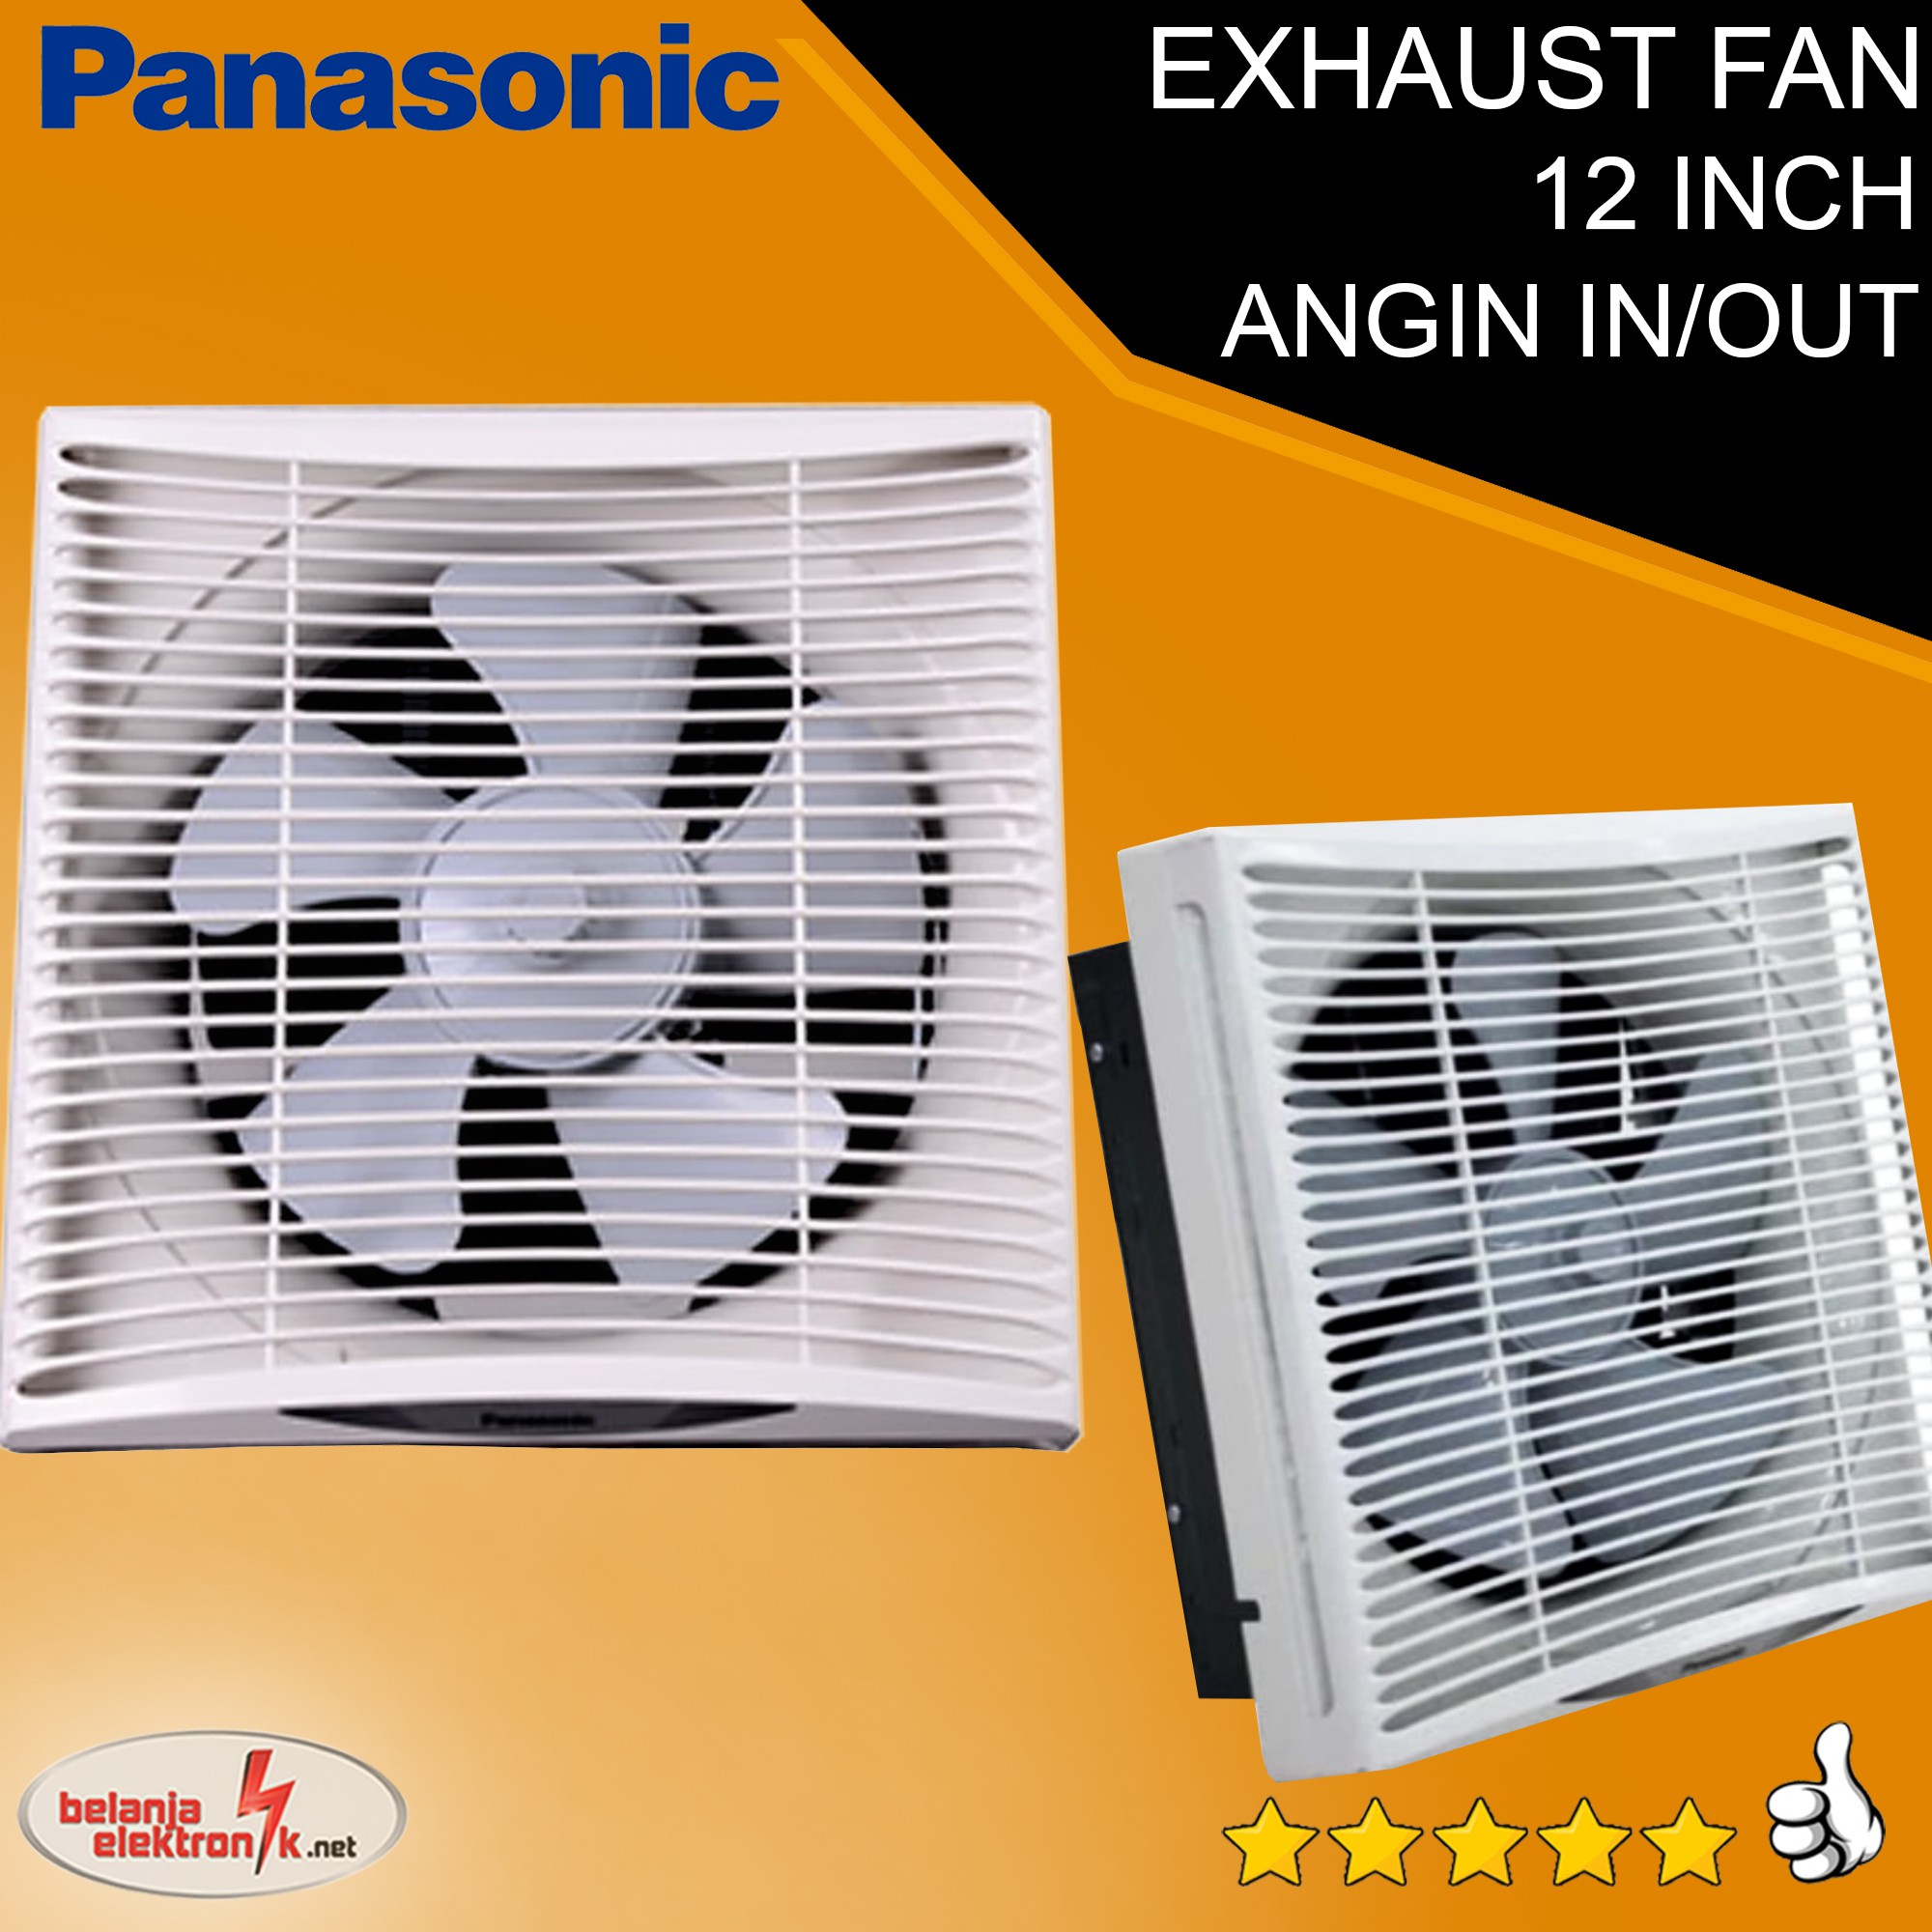 1 exhaust fan with fans only